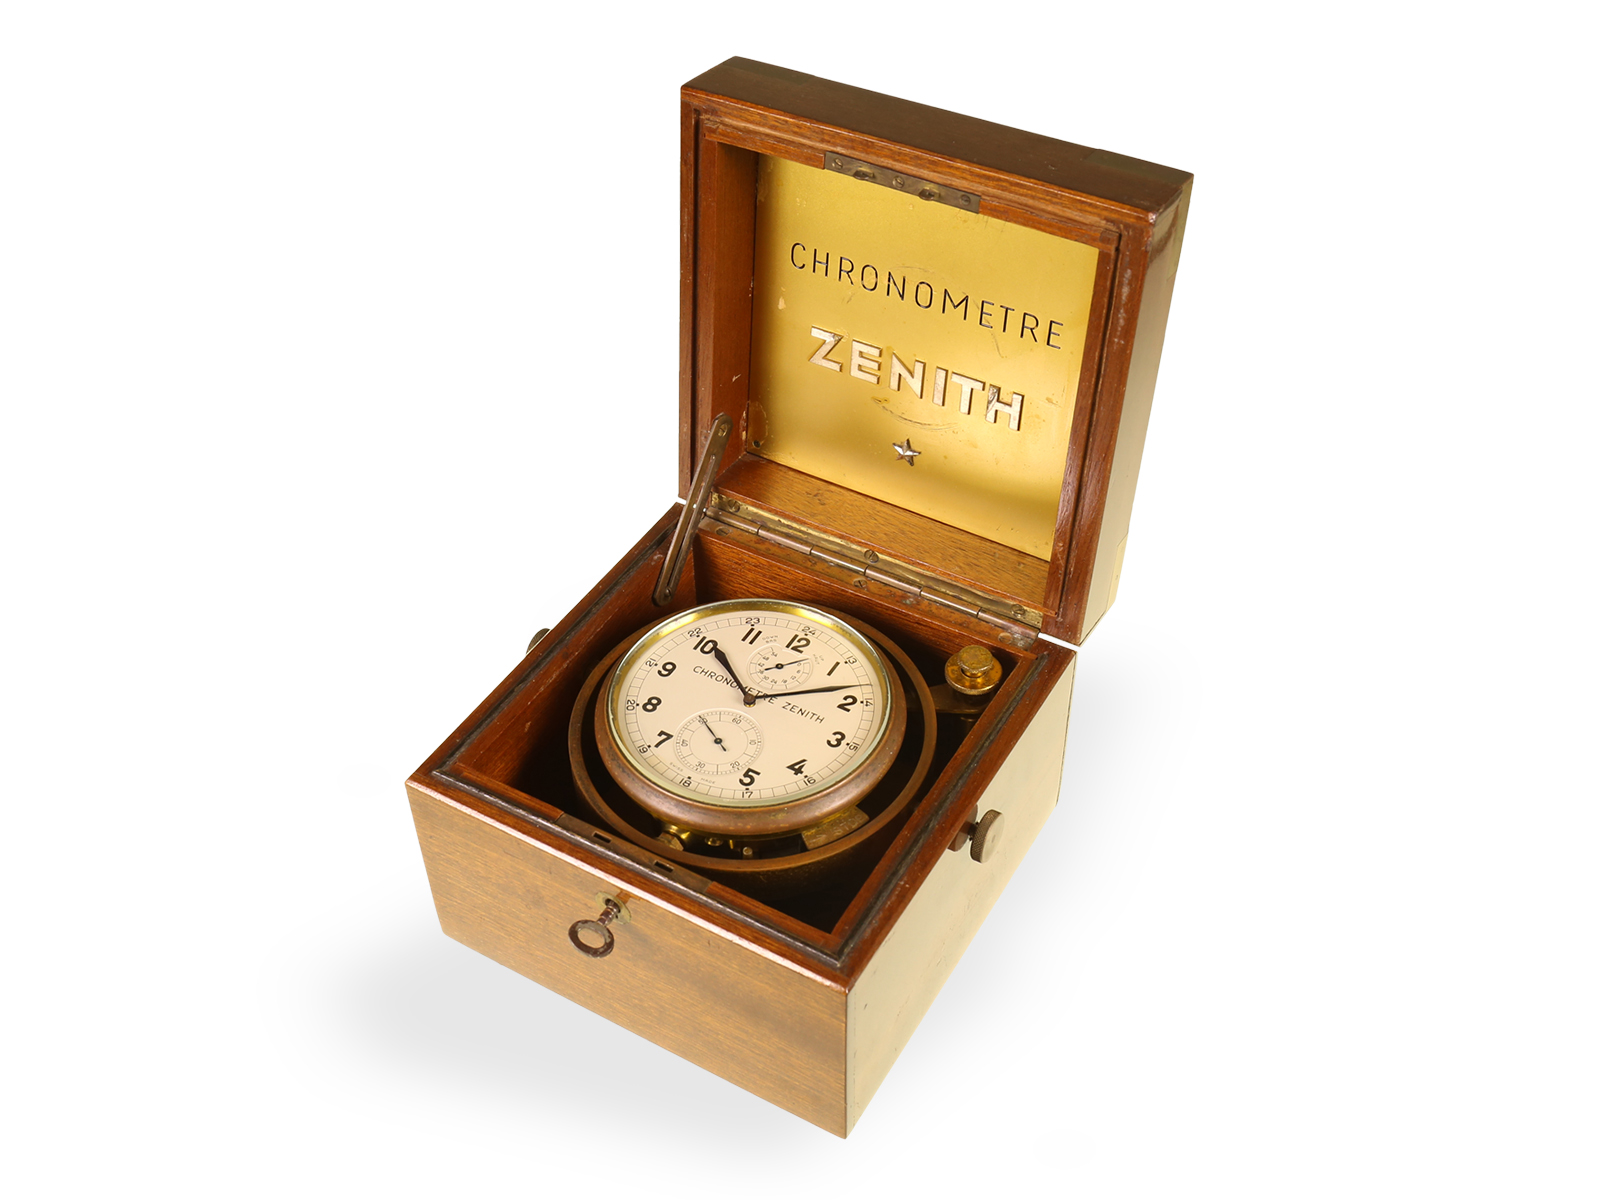 Excellently preserved Zenith marine chronometer, 1930s